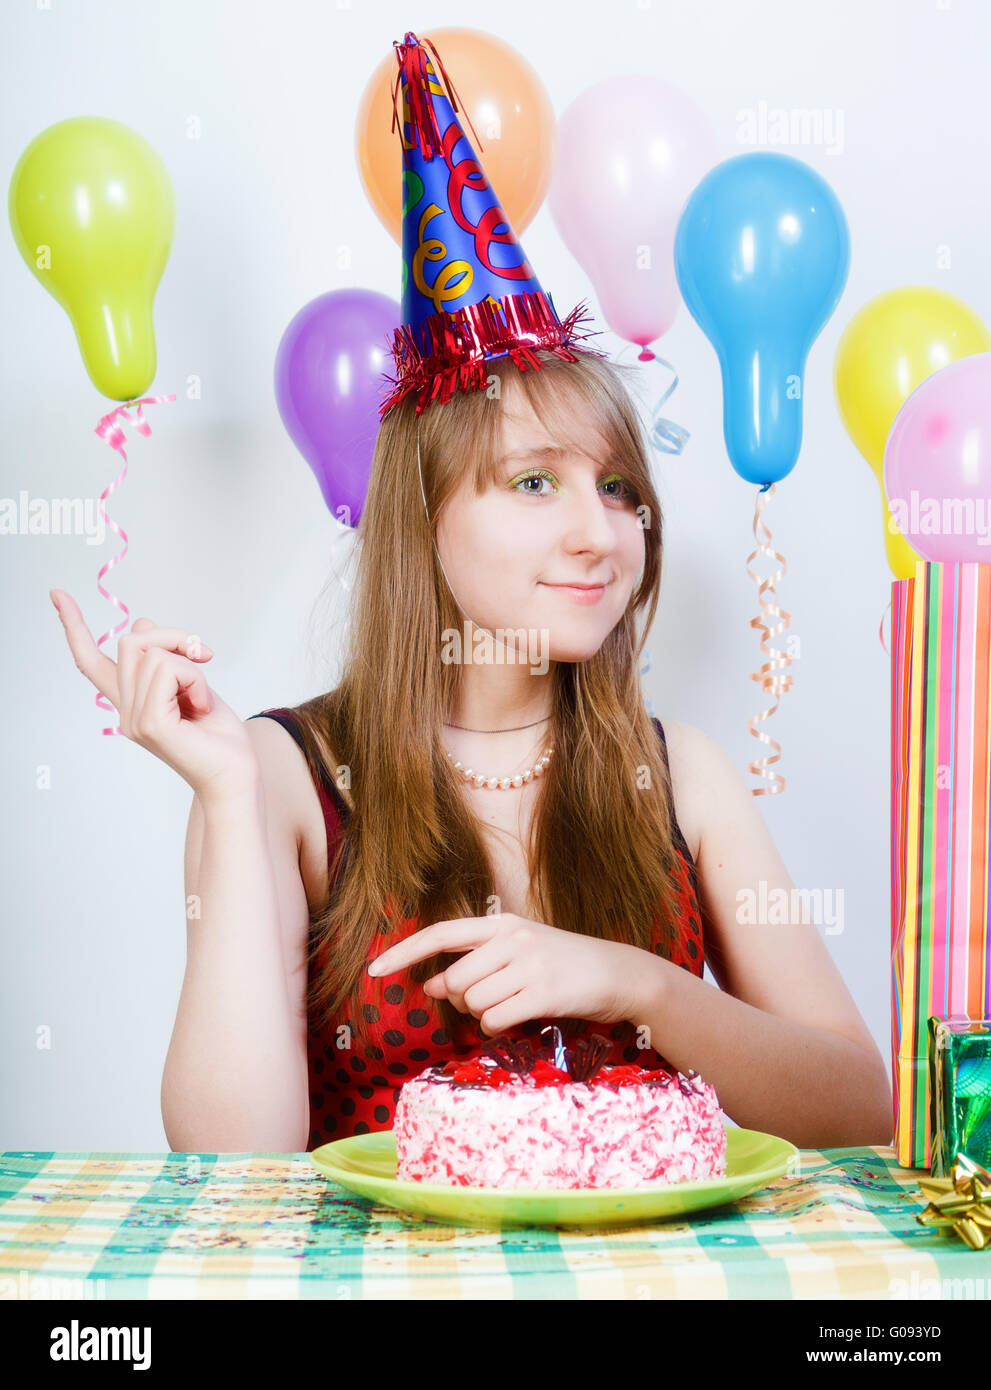 Happy birthday. Attractive young girl with cake Stock Photo